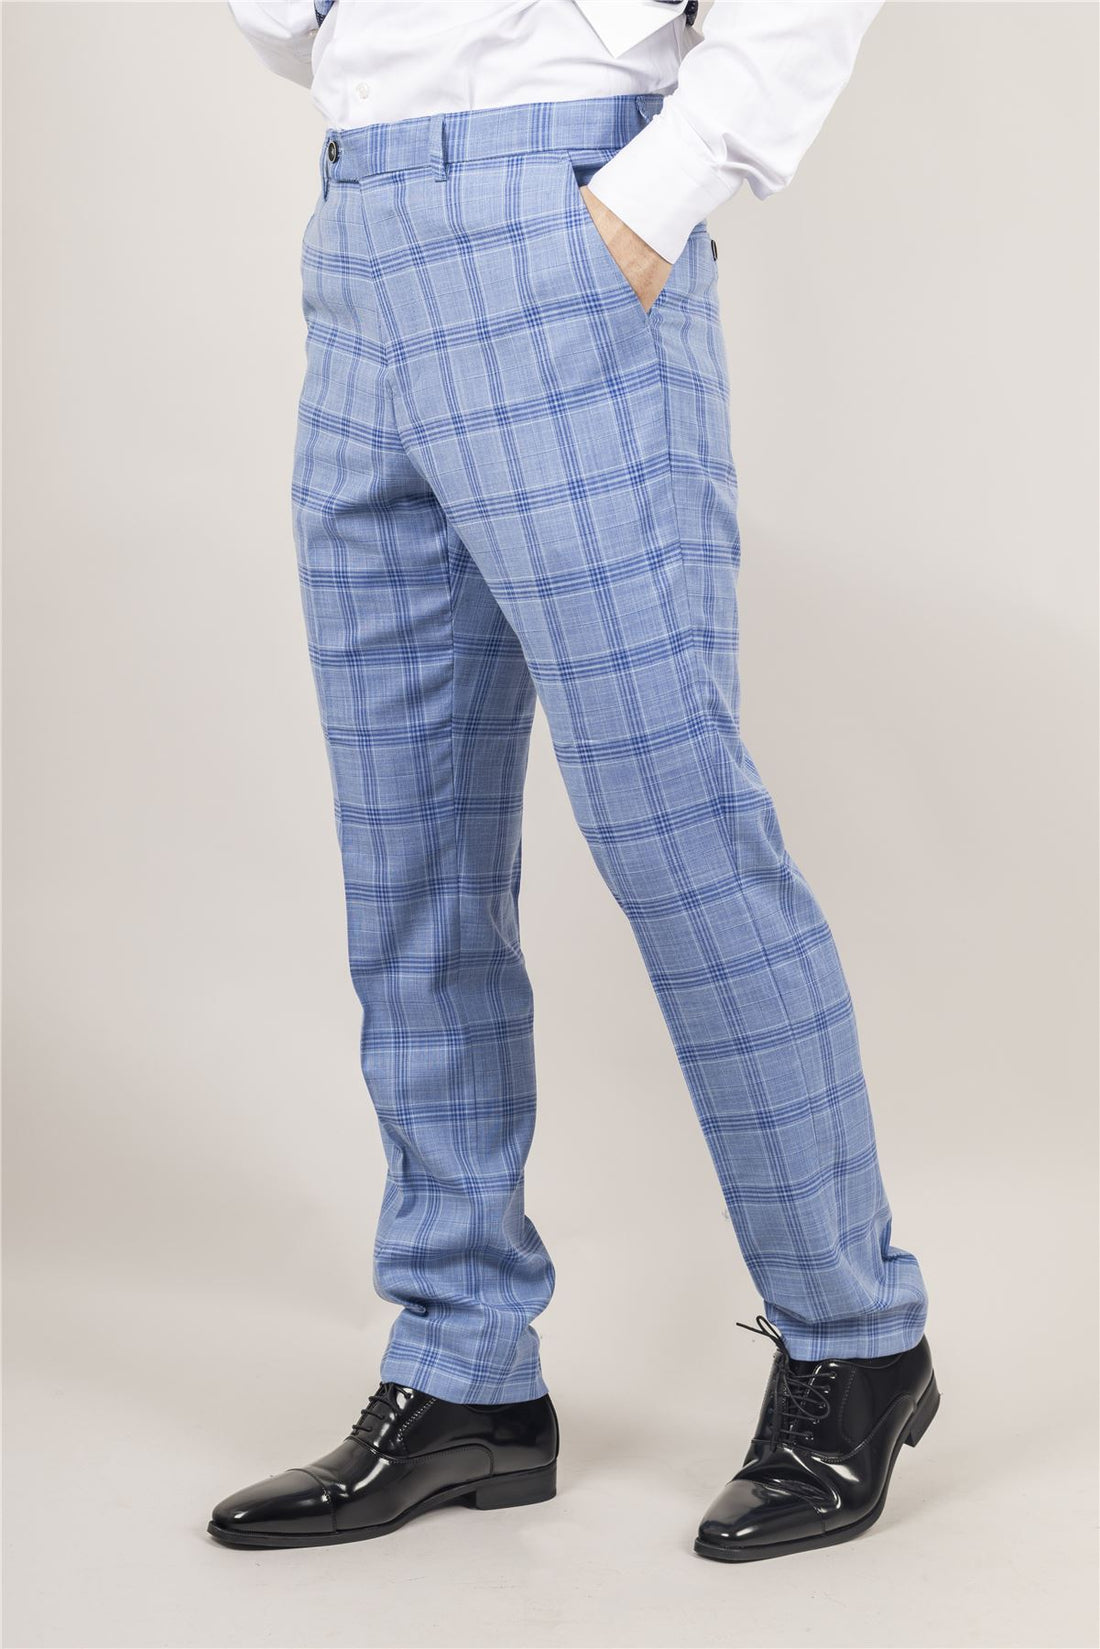 Men's Trousers Light Blue Checked Casual Formal Pants